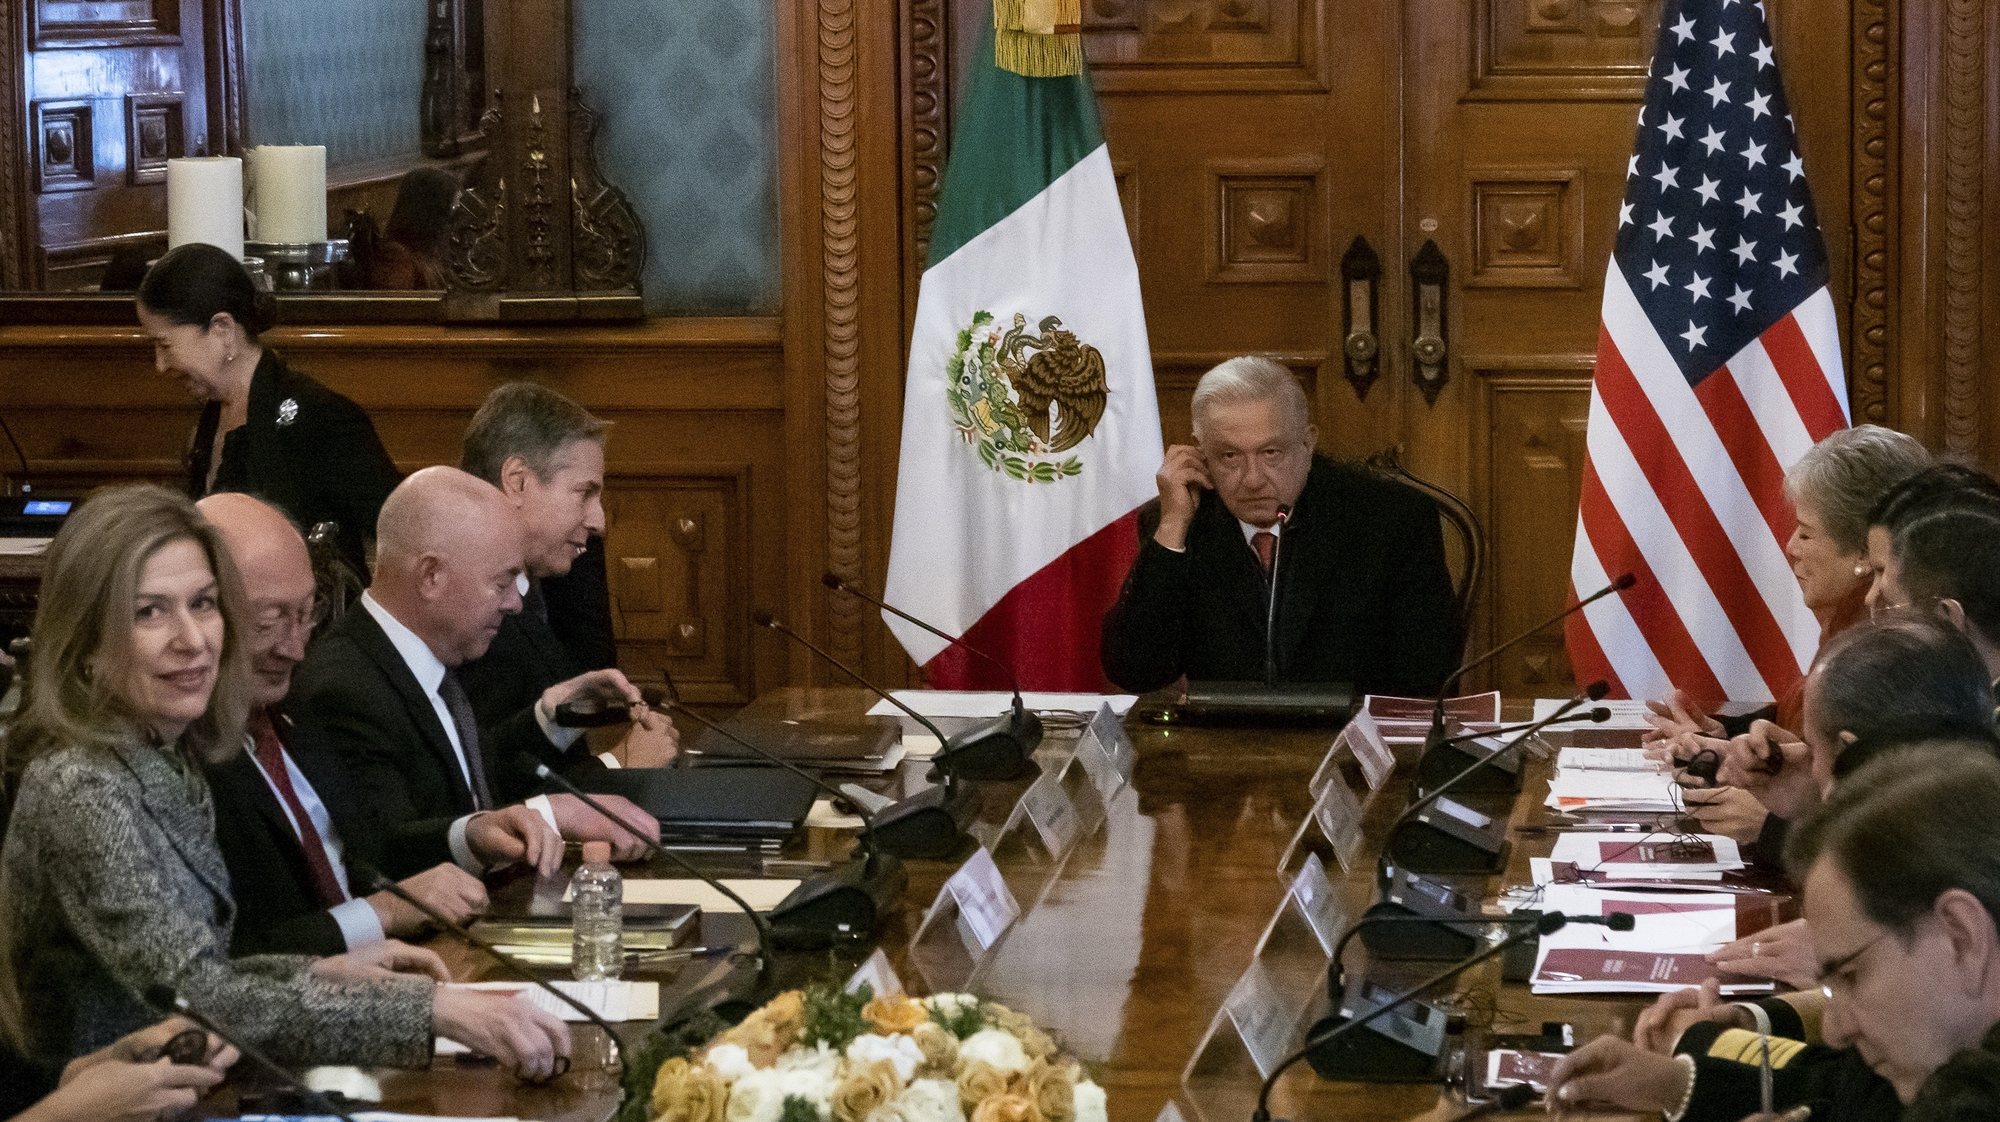 epa11046227 Mexican President Andres Manuel Lopez Obrador (C), meets with the US Secretary of State Antony Blinken (C-L), during a working meeting at the National Palace in Mexico City, Mexico, 27 December 2023. Obrador and Blinken met on 27 December 2023 to analyze the increase in migratory flows, which led the US to close border ports for a few days this month.  EPA/Madla Hartz